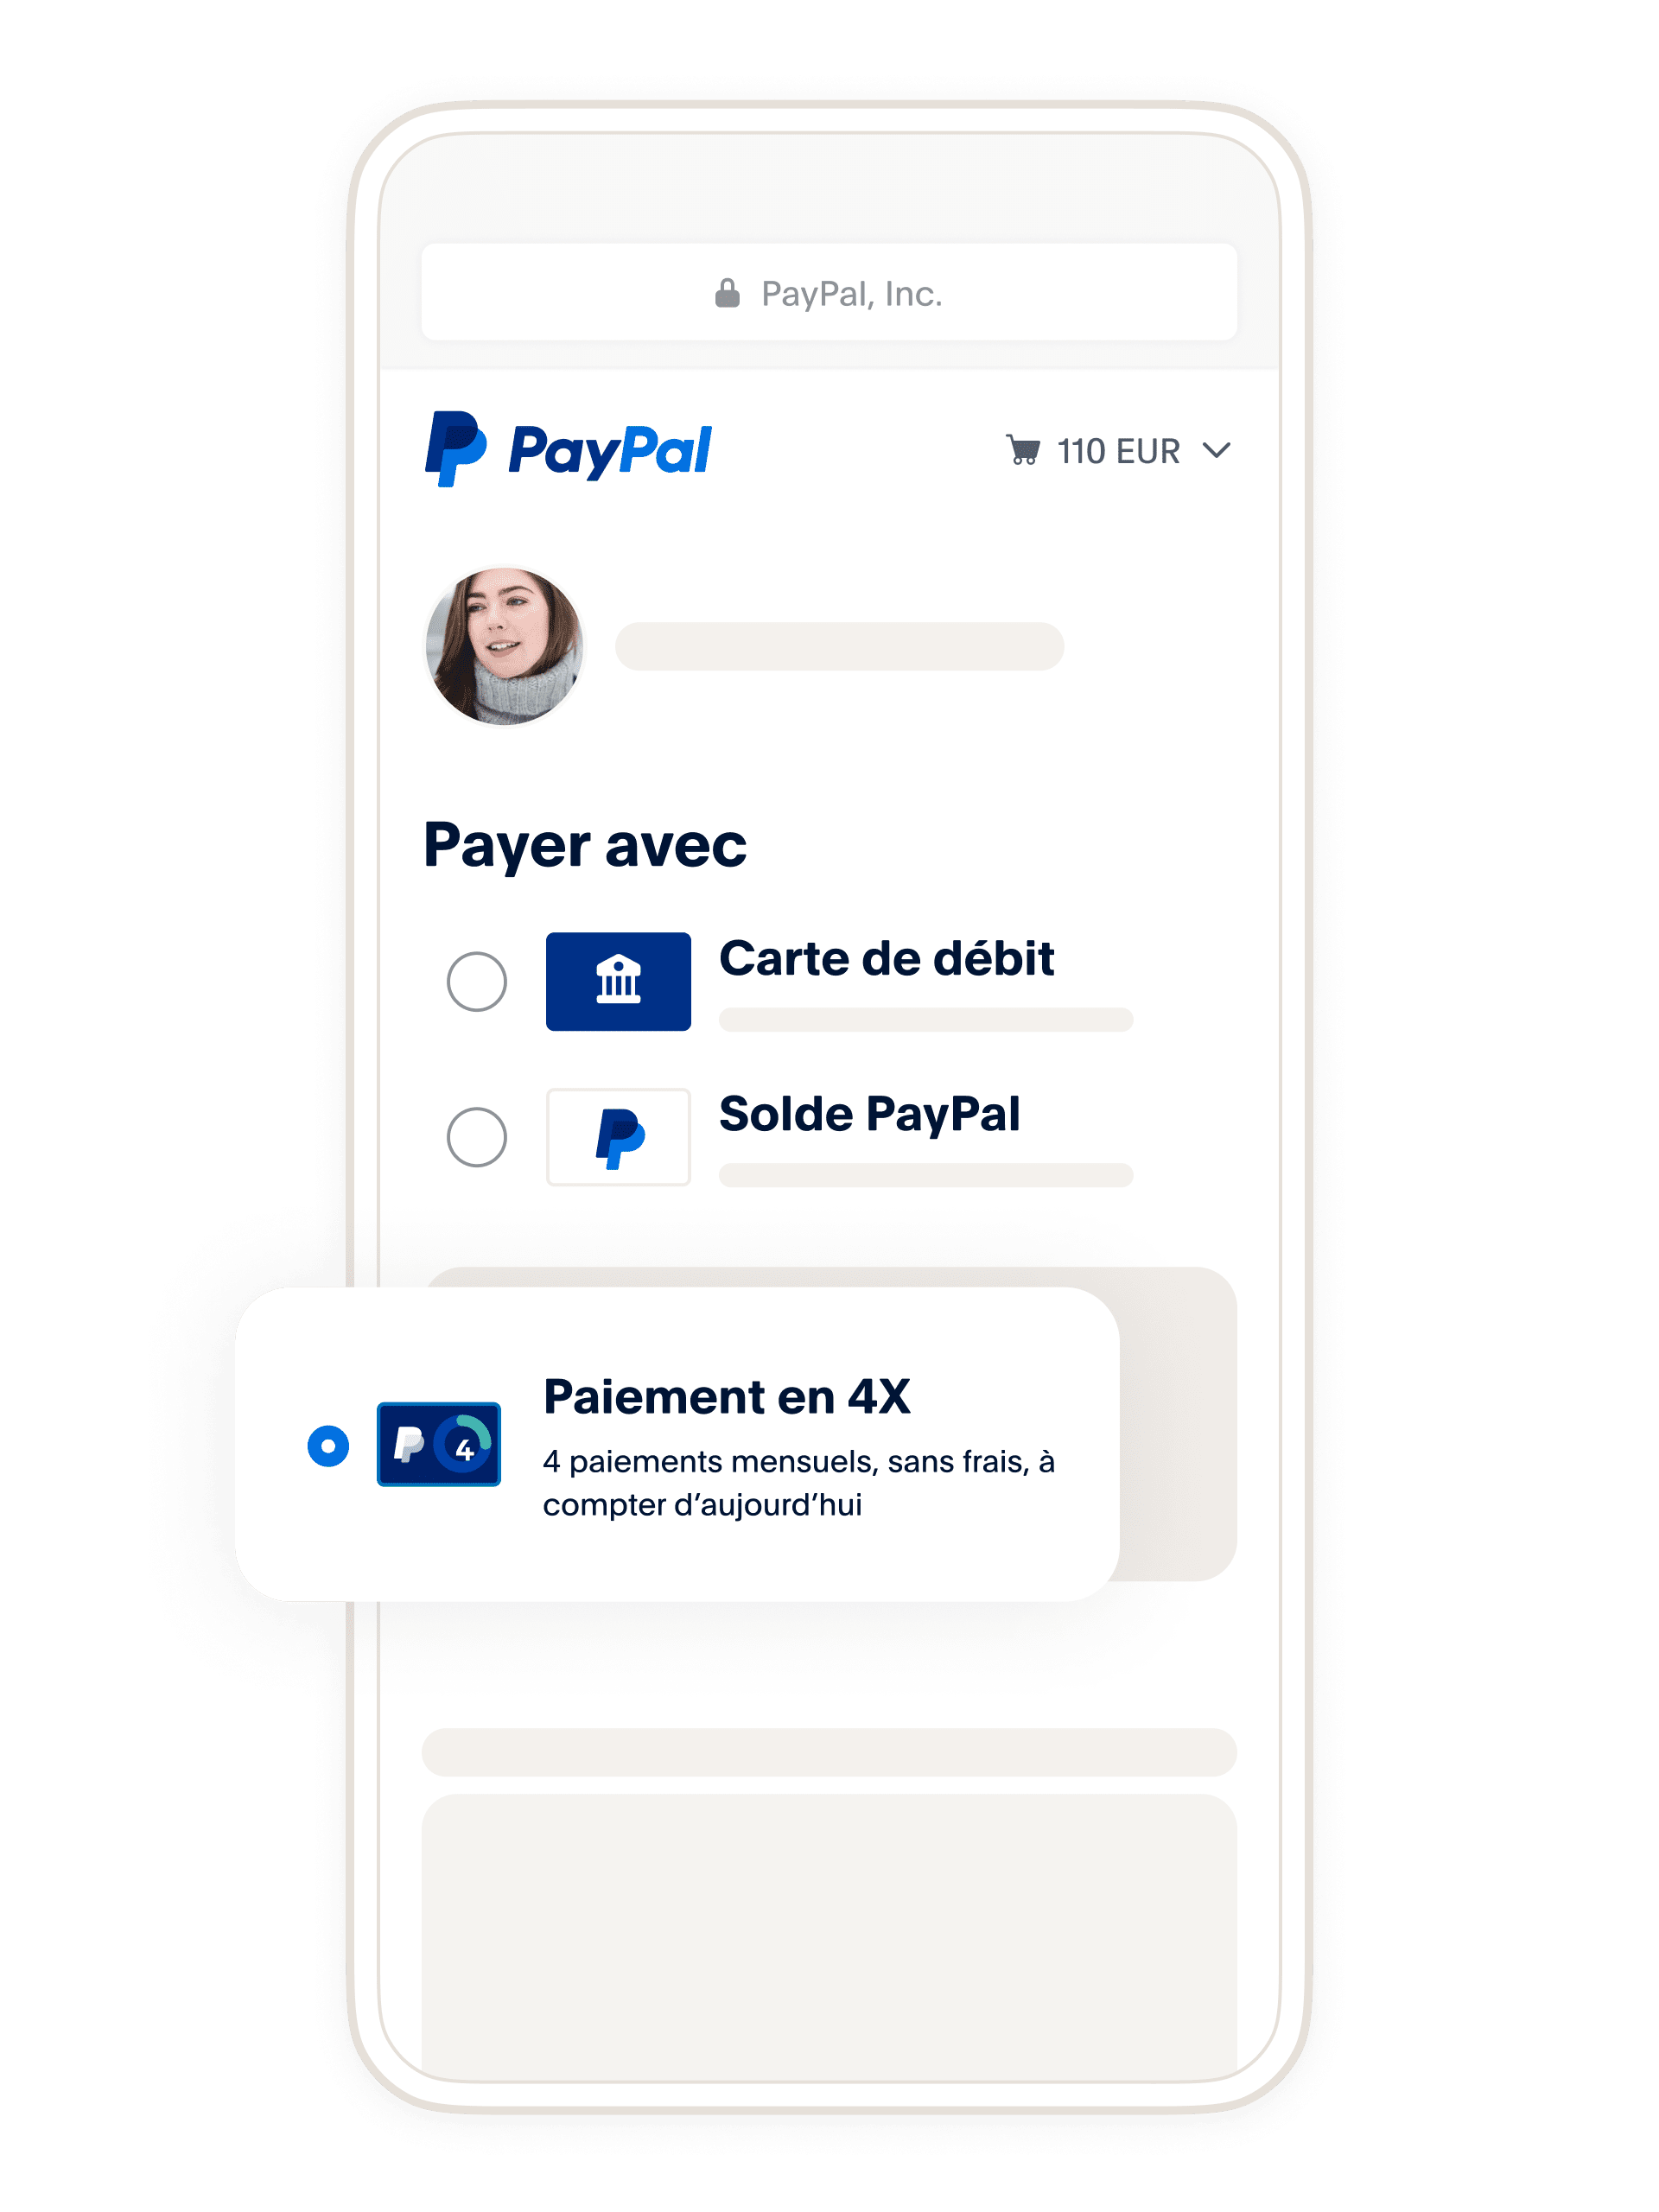 https://www.paypalobjects.com/marketing/web23/fr/consumer/buy-now-pay-later/french/product-scroll-section-1-size-mobile-up_v1.png